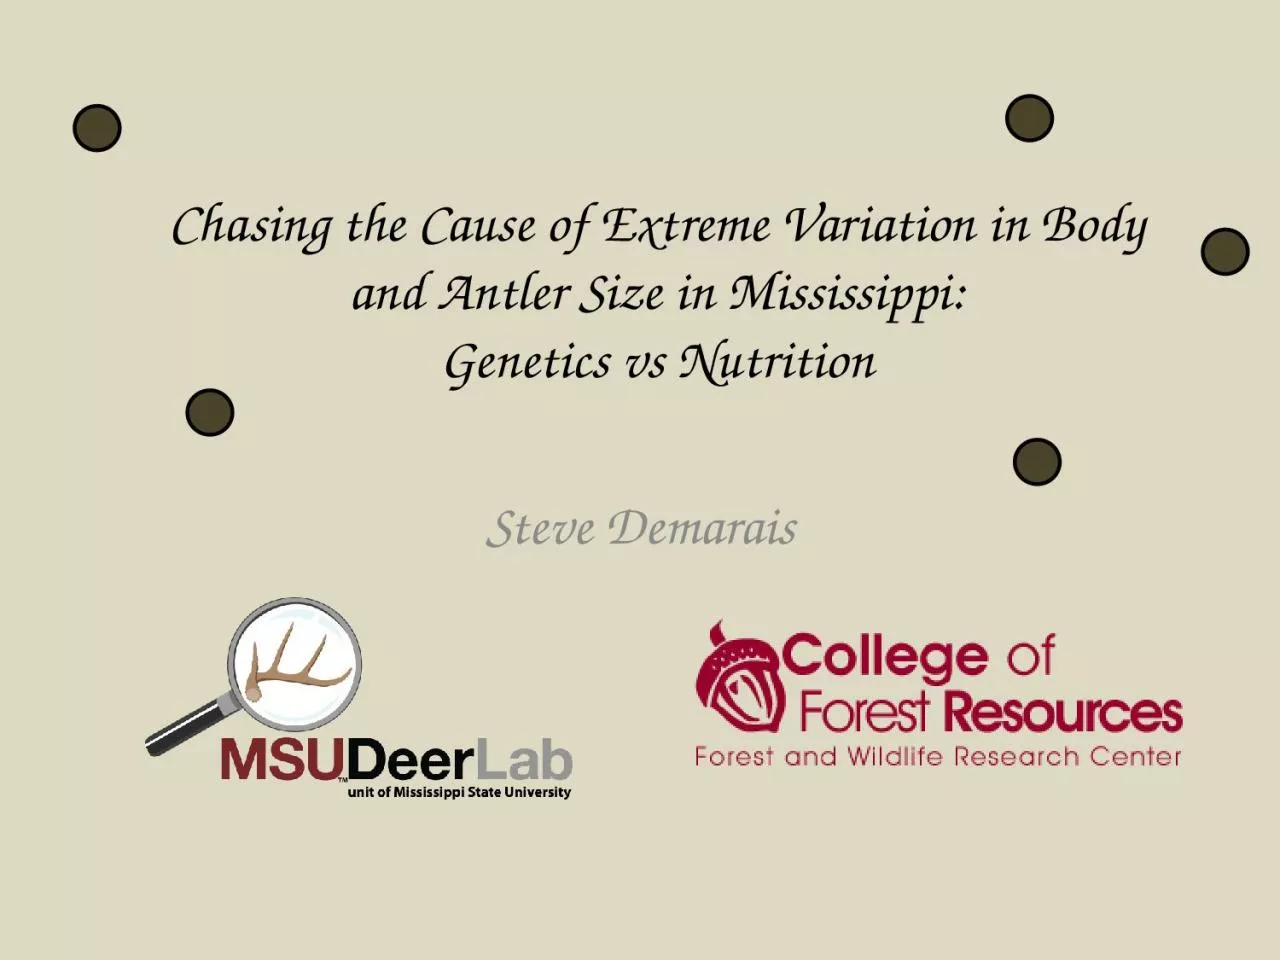 Chasing the Cause of Extreme Variation in Body and Antler Size in